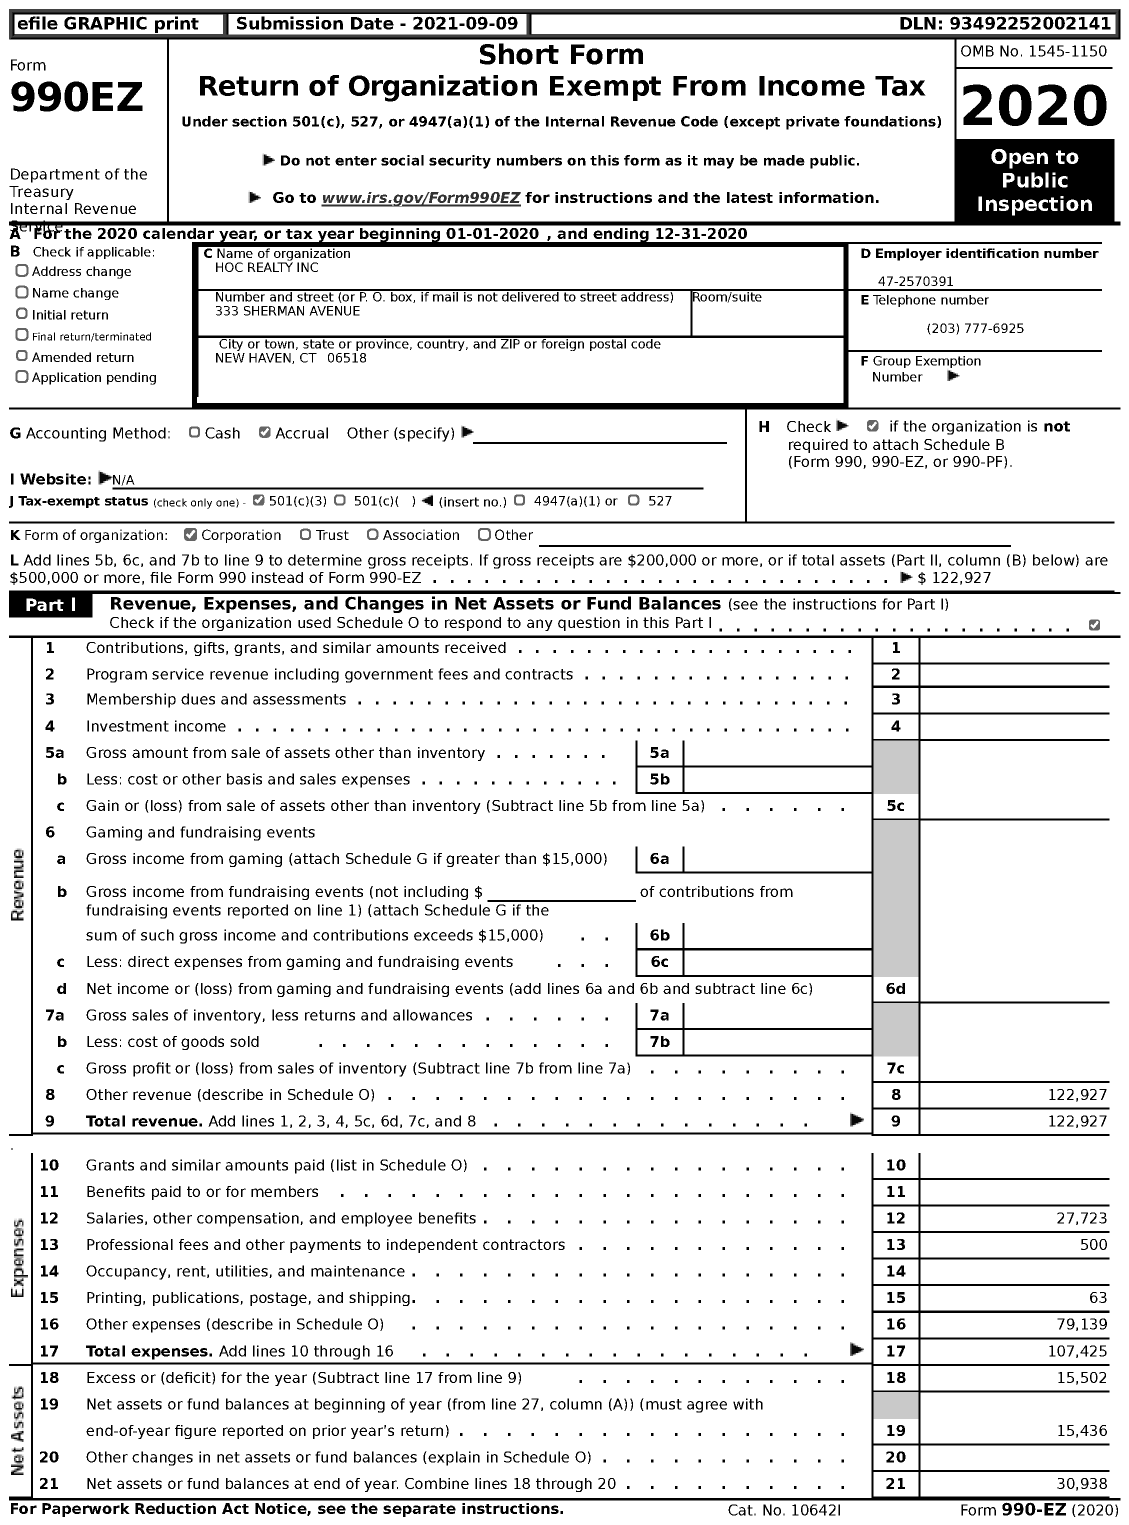 Image of first page of 2020 Form 990EZ for Hoc Realty